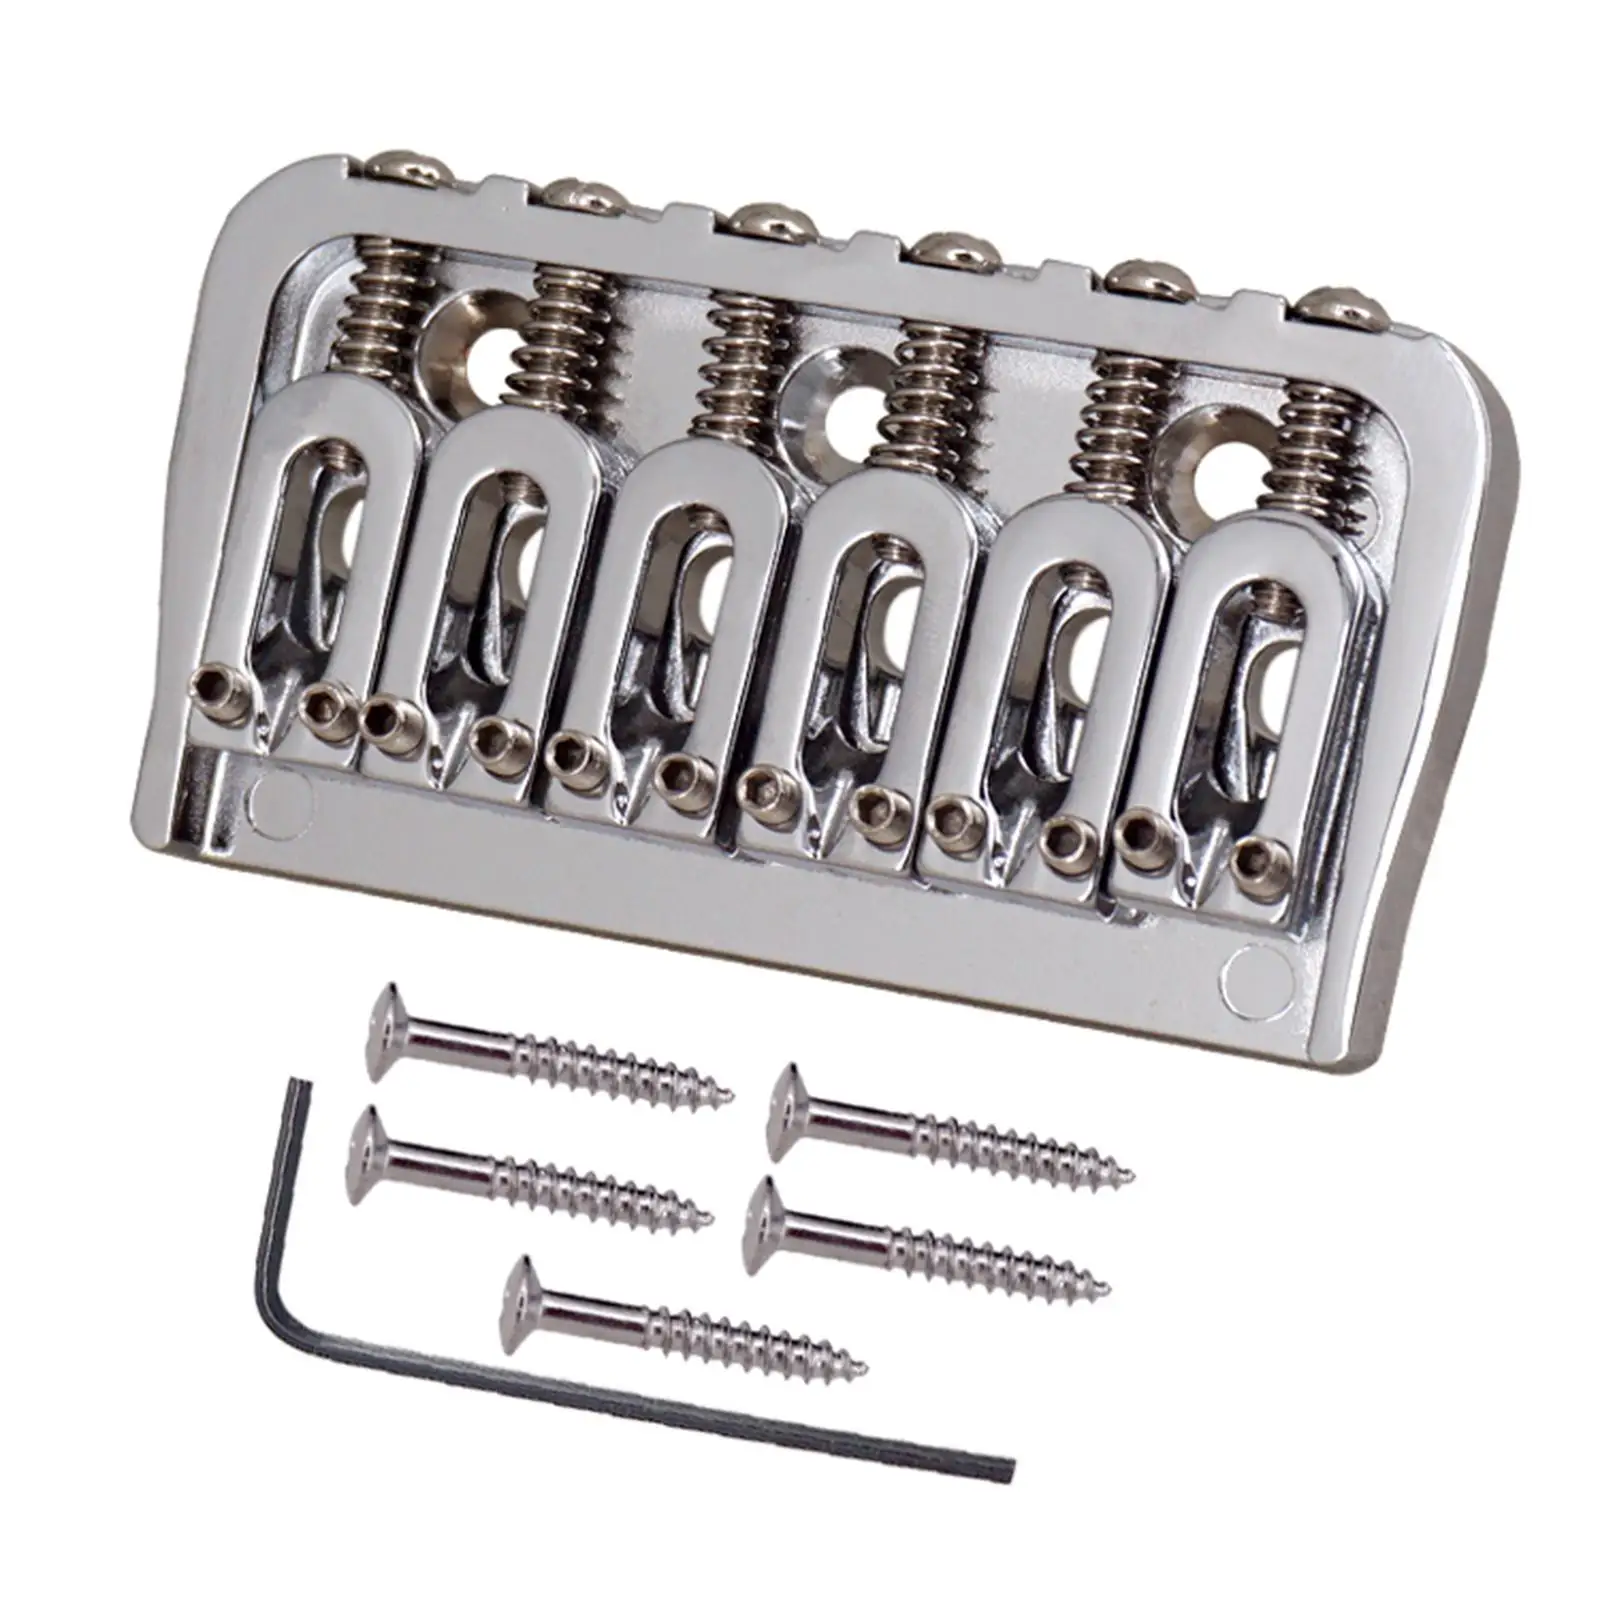 52.5mm Electric Guitar Hardtail Fixed Bridge Set with Mounting Screw & Hex Wrech for 6 Strings Electric Guitar Replace Accessory